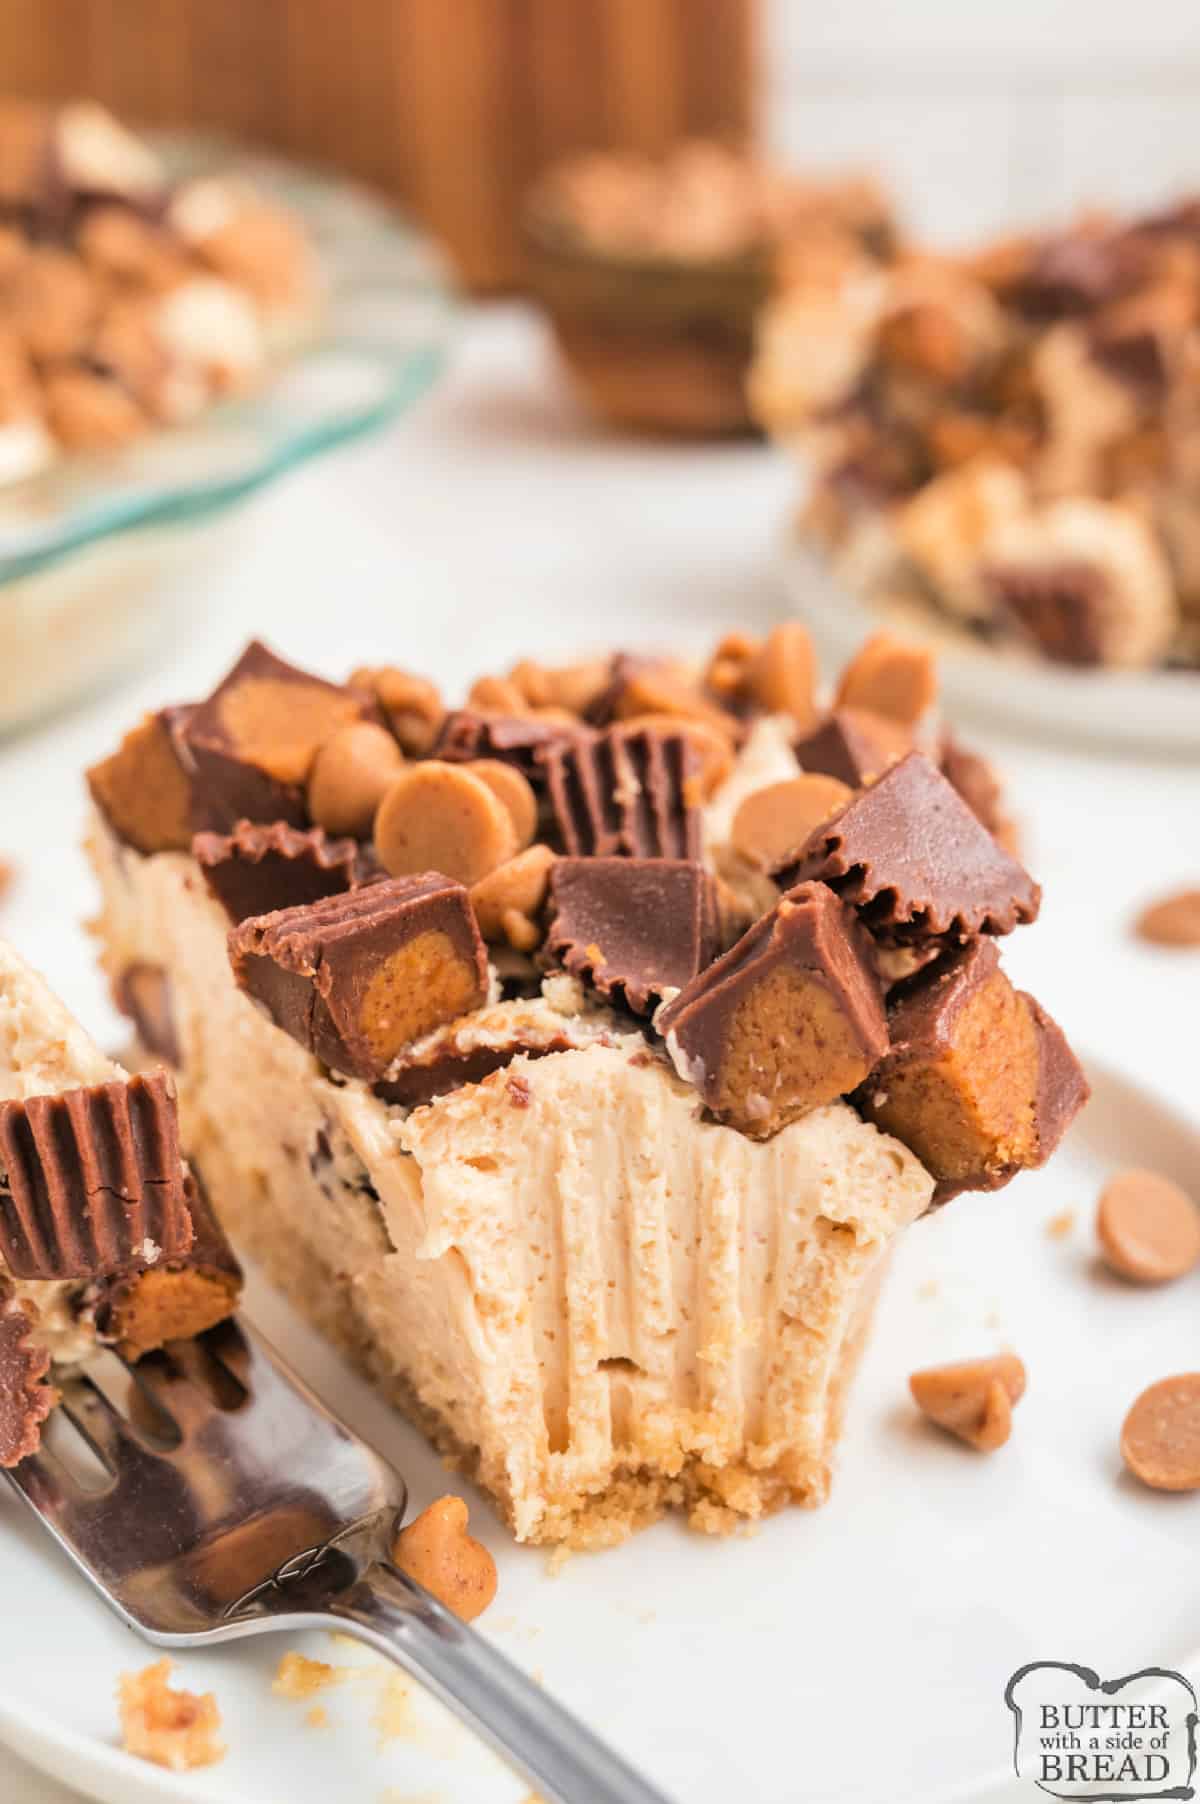 Slice of peanut butter pie with peanut butter cups.